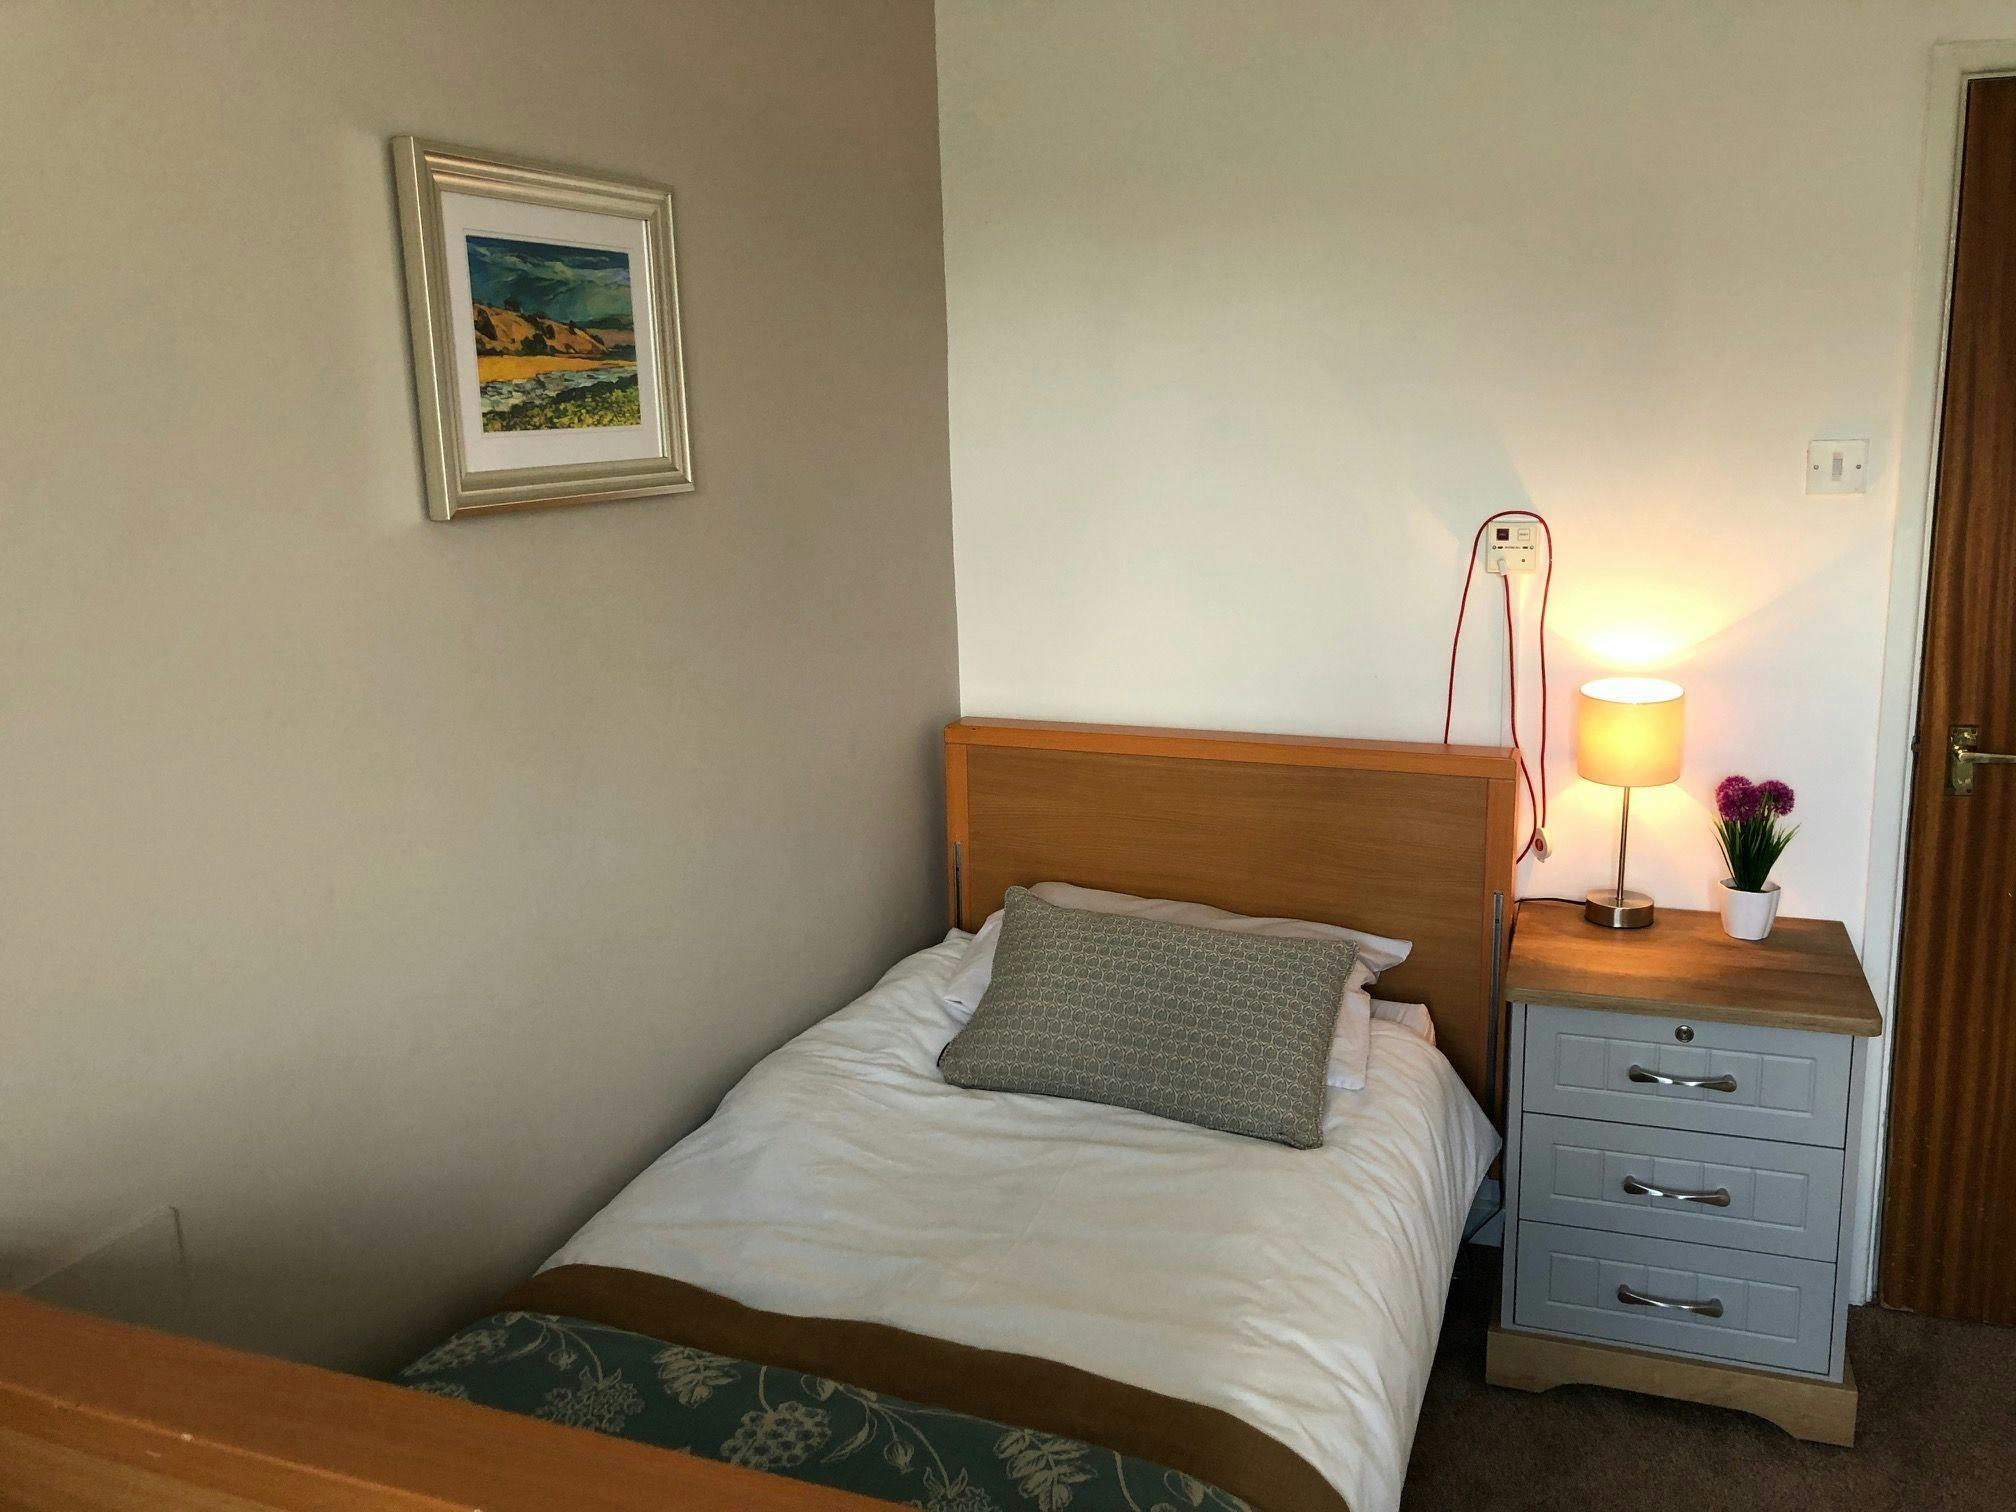 Bedroom of Northleach Court care home in Cheltenham, Gloucestershire